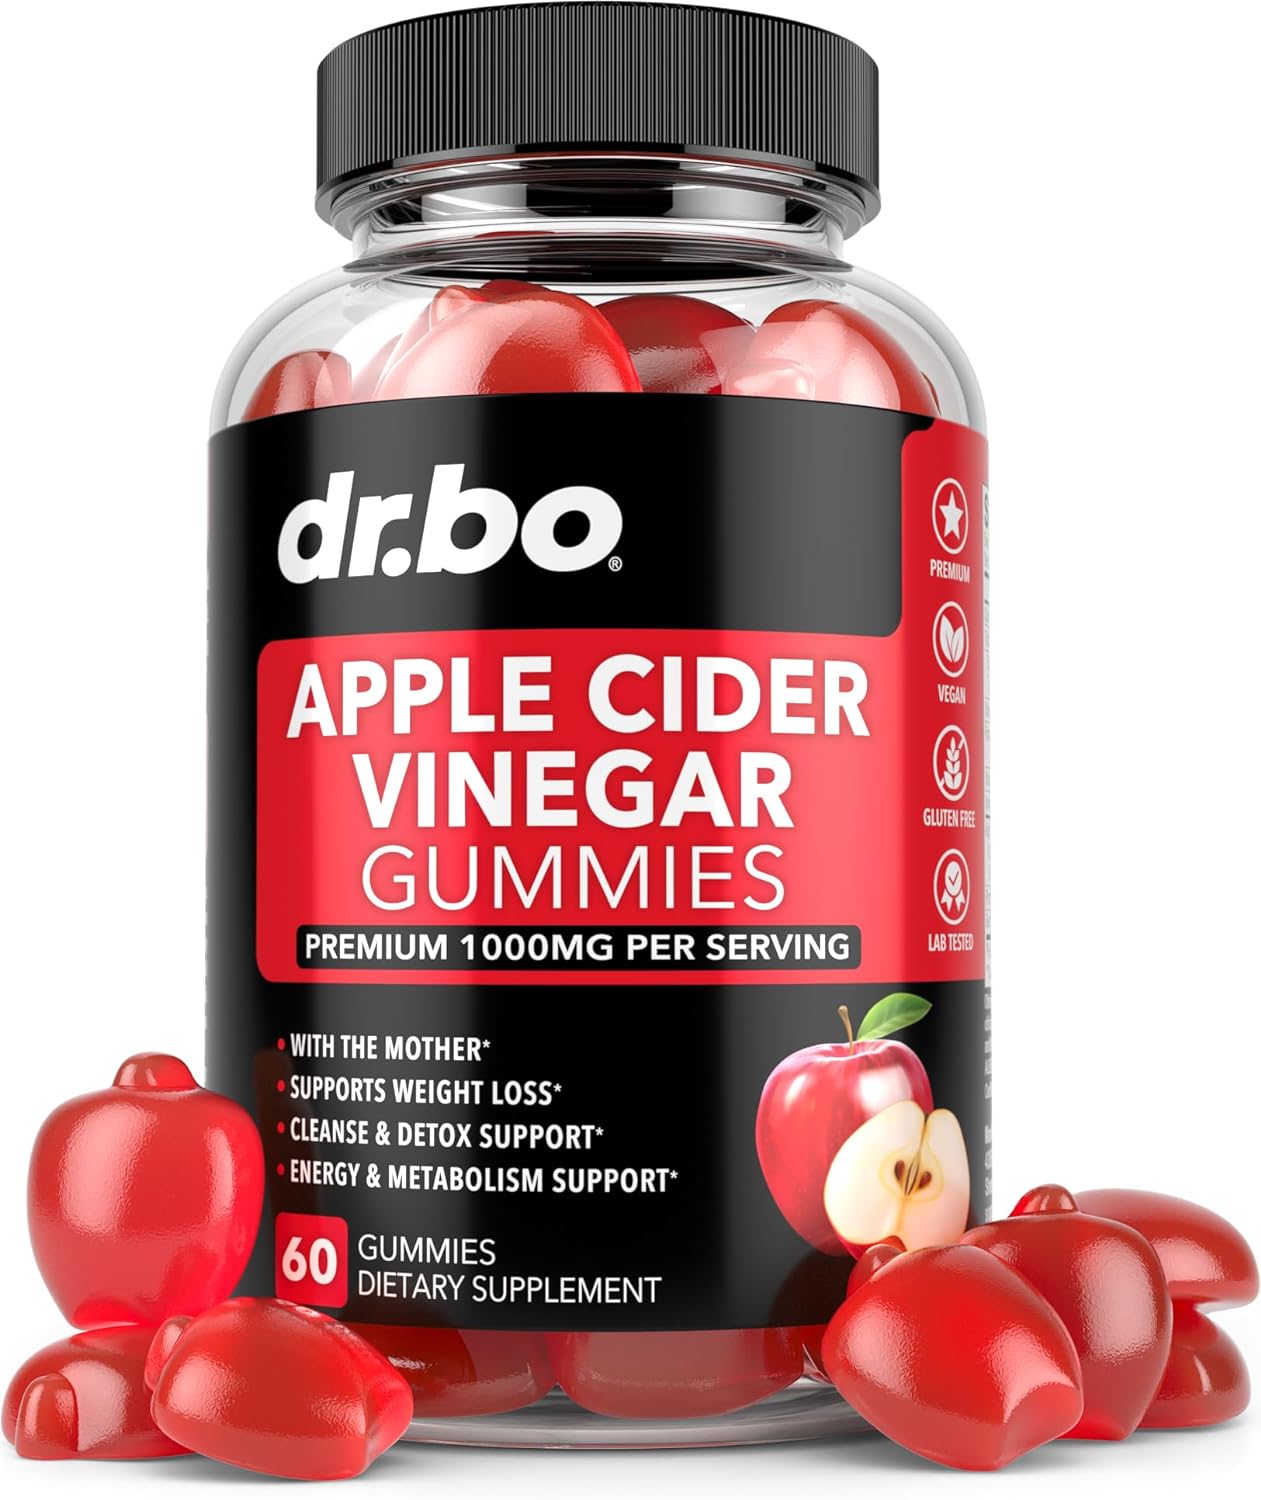 ACV Apple Cider Vinegar Gummies - Natural Support for Advanced Weight Loss, Detox, Cleansing, Digestion  Gut Health - ACV Gummies Supplements with 1000MG Apple Cider Vinegar Gummies with The Mother